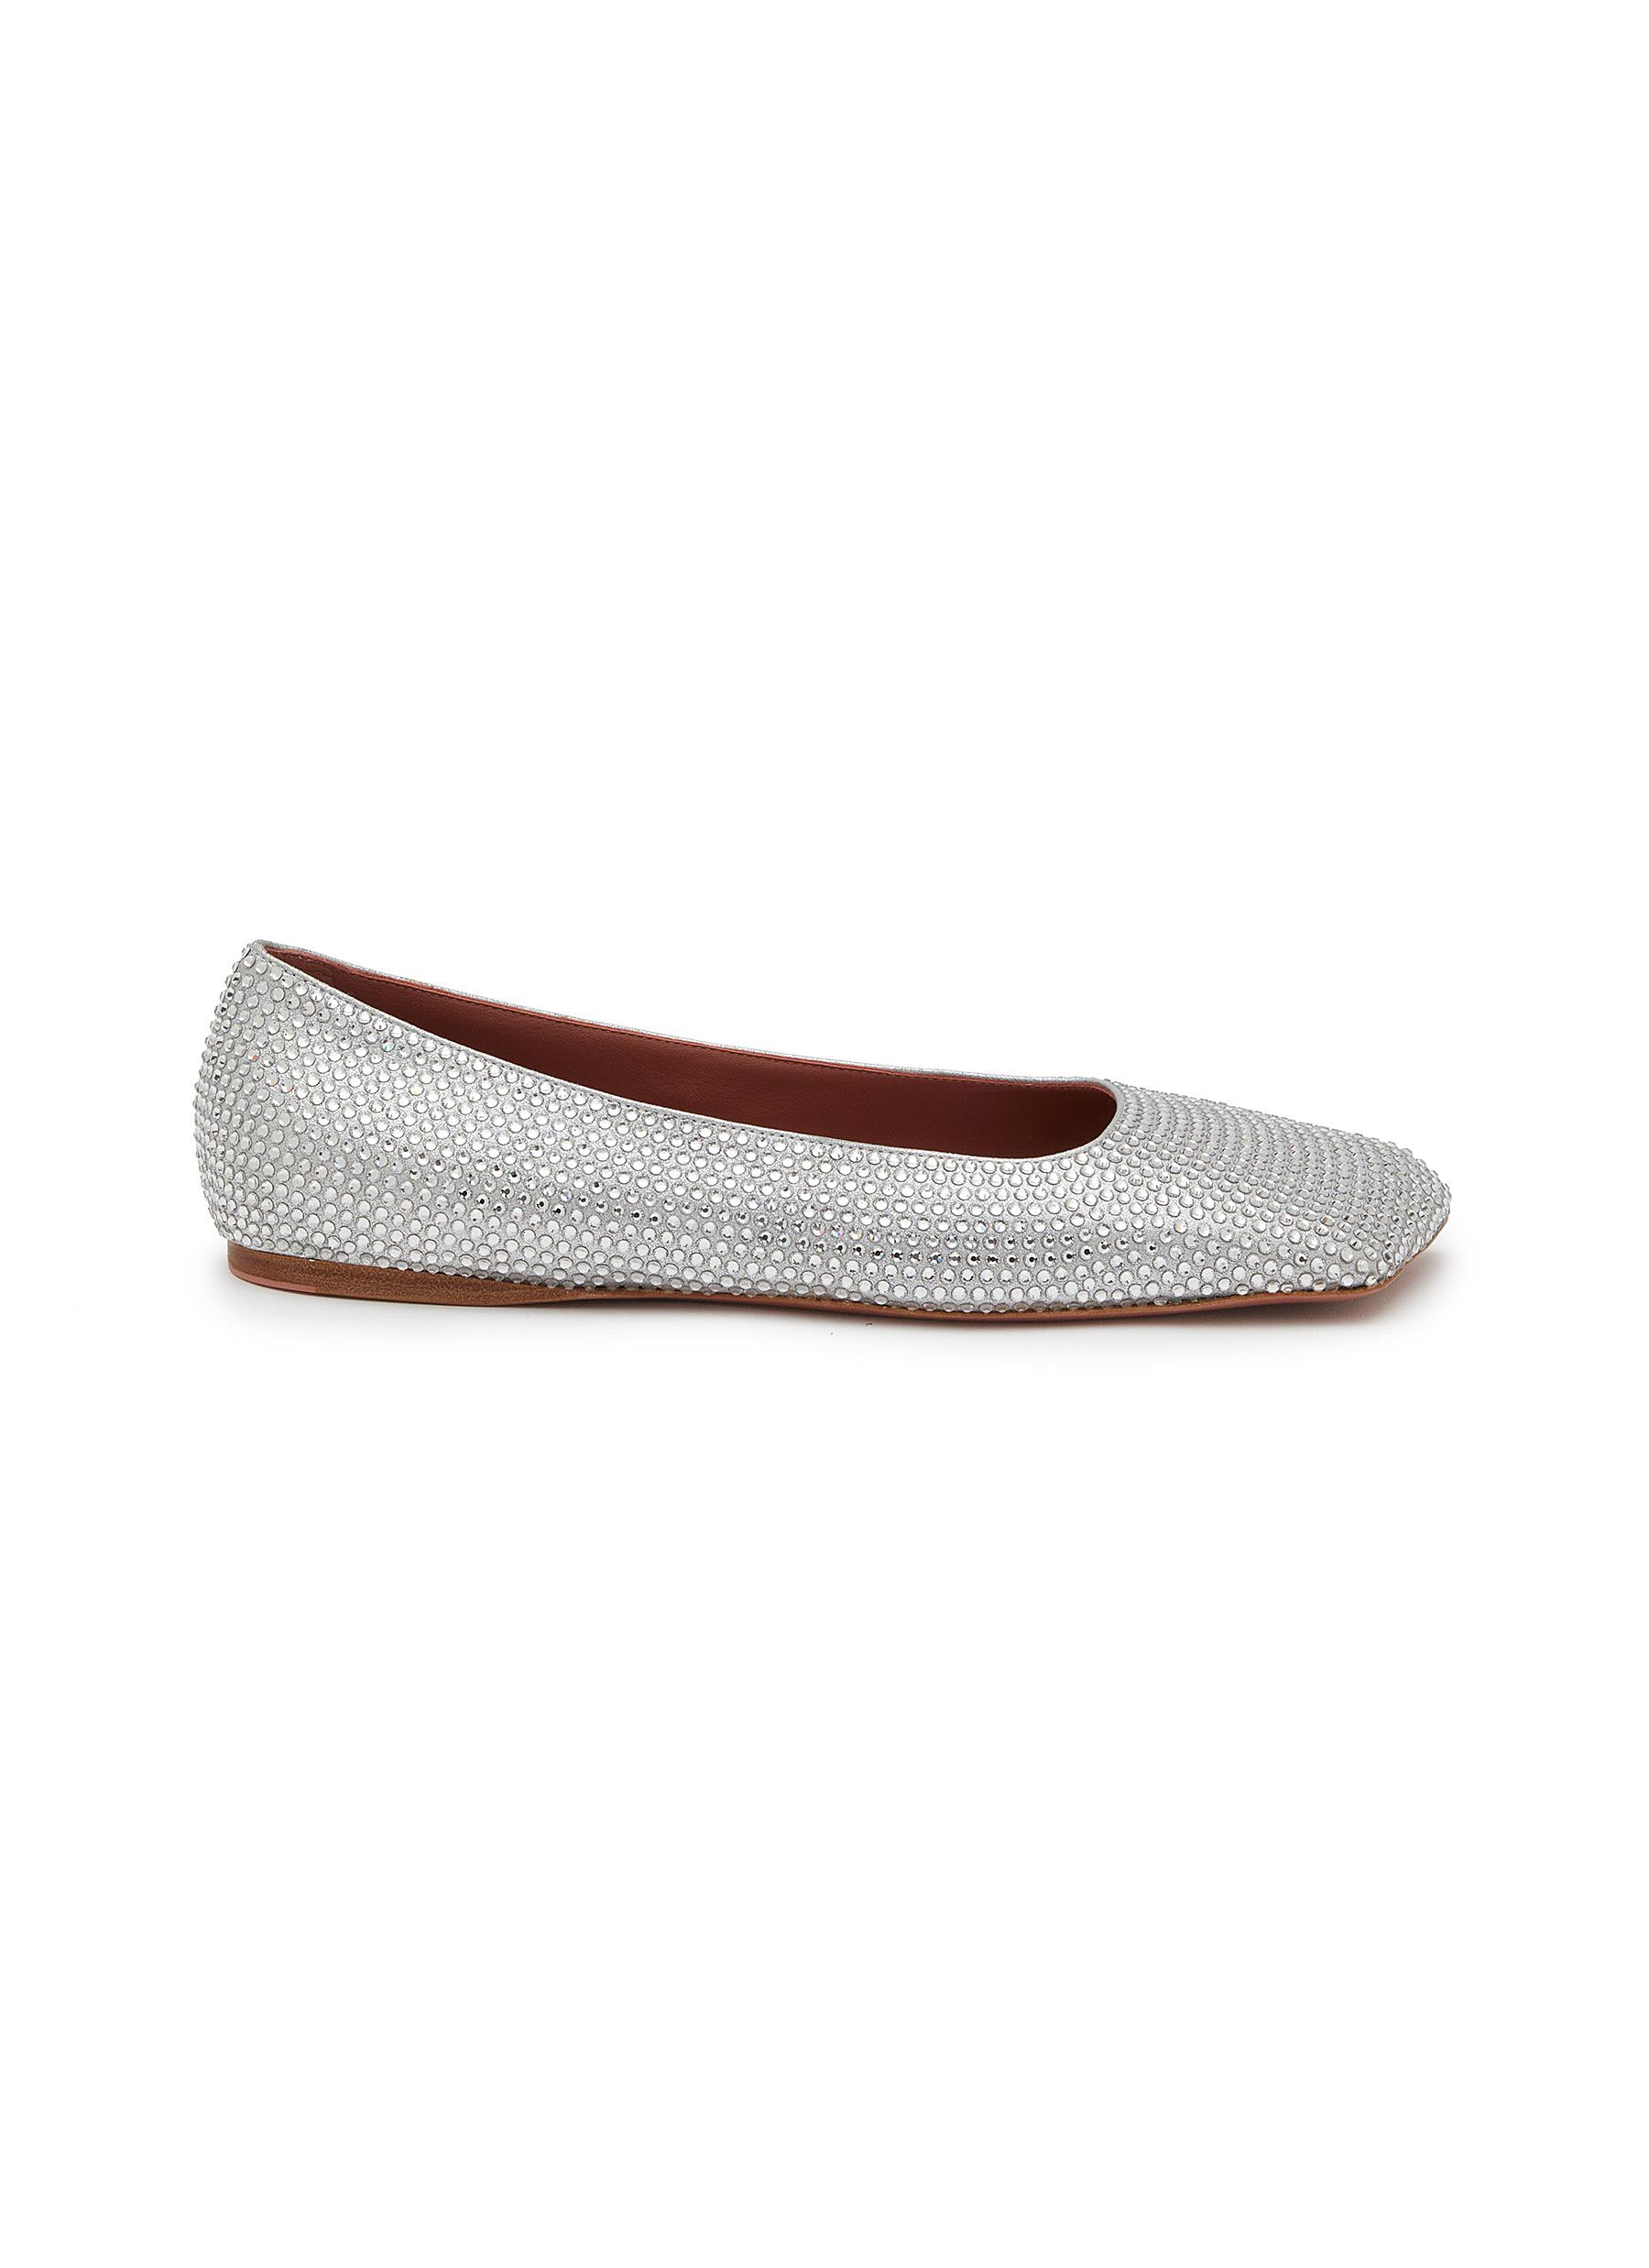 Ane Crystal Suede Flats